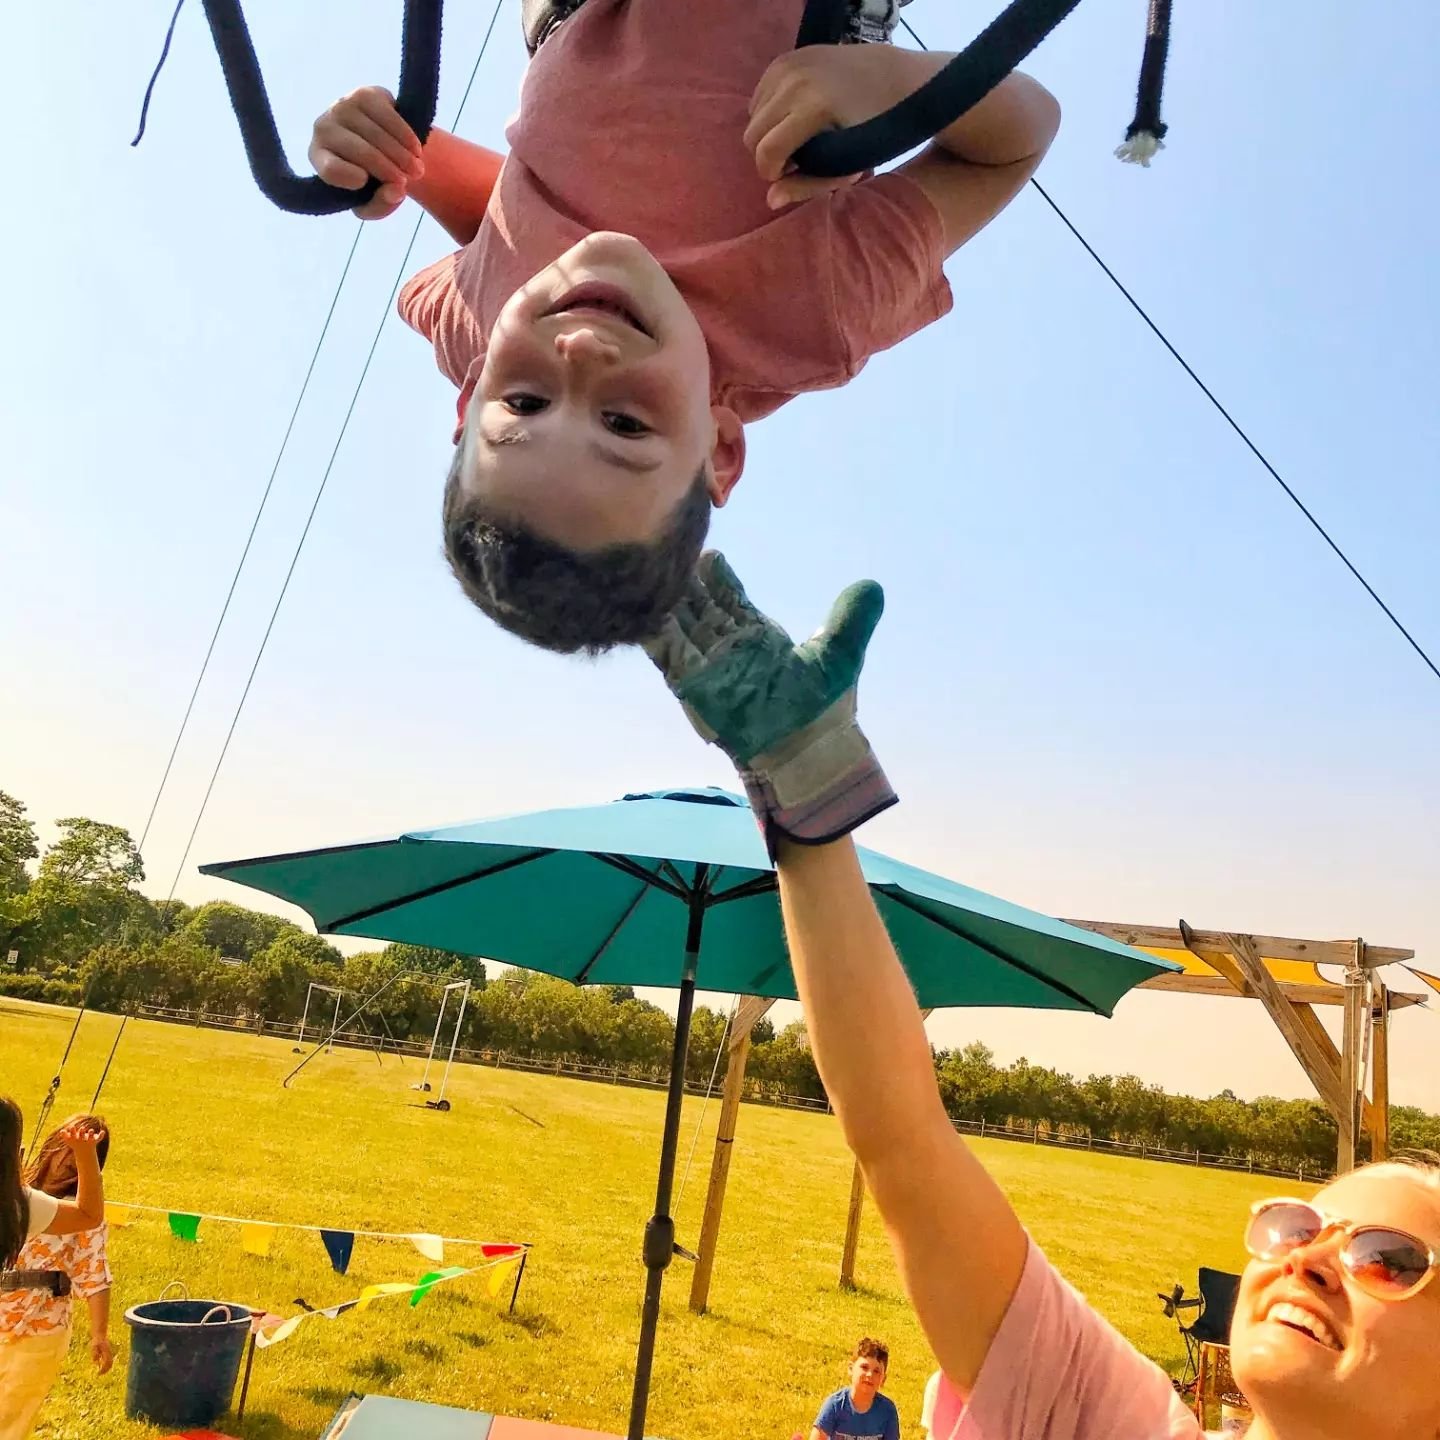 It's all #funinthesun here at the #trapeze and we are waiting for YOU to join us and #fly 👐

Spots are filling up in our August #workshop, but there's still space available, and you can get a custom t-shirt if you sign up before August 1st

Check ou